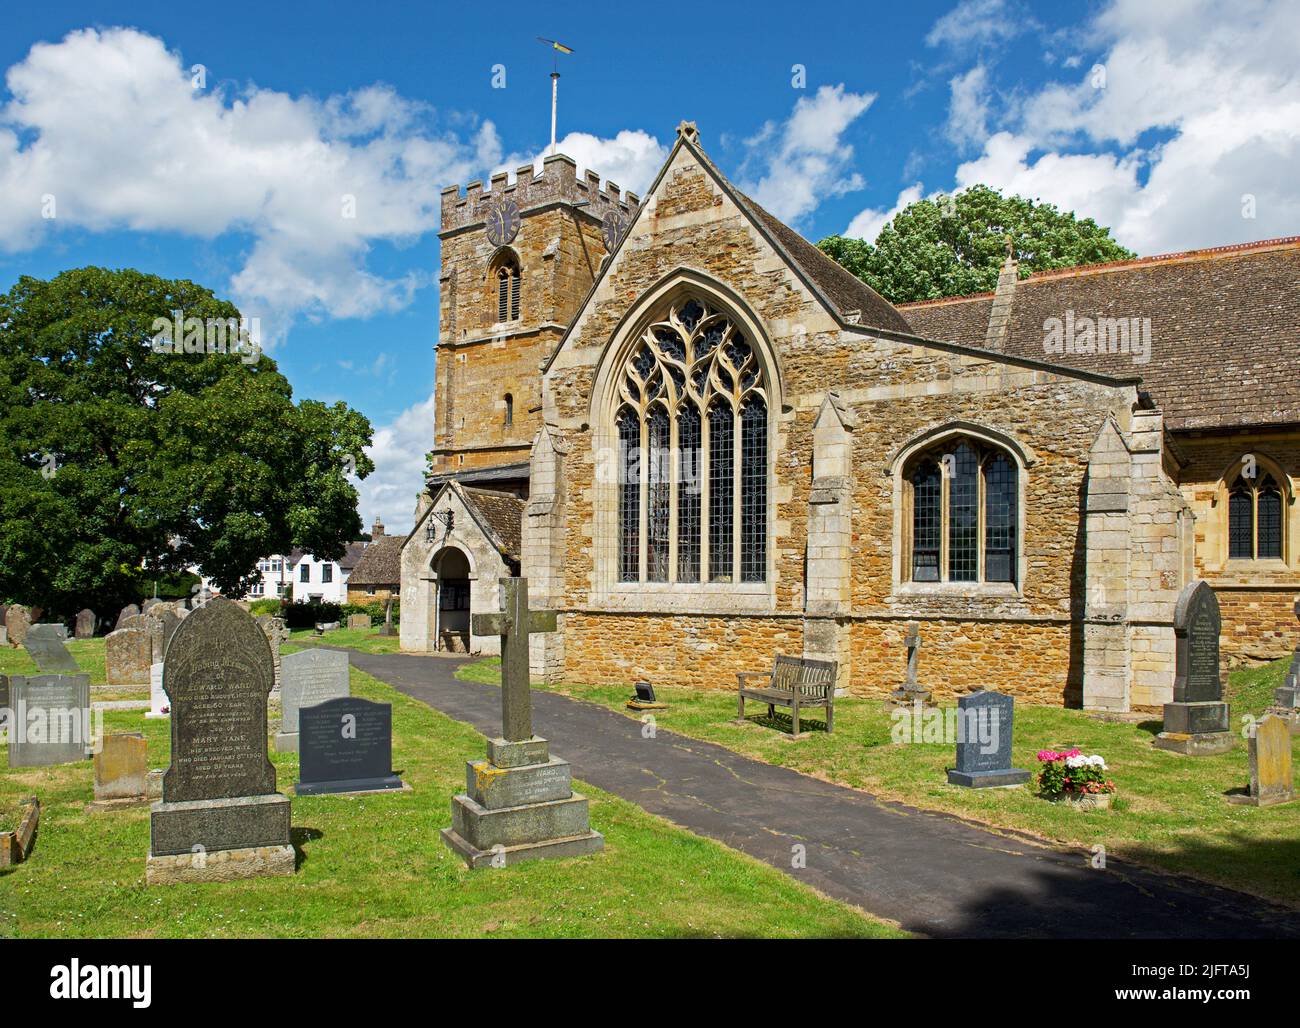 St Giles church in the village of Medbourne, Leicestershire, England UK Stock Photo